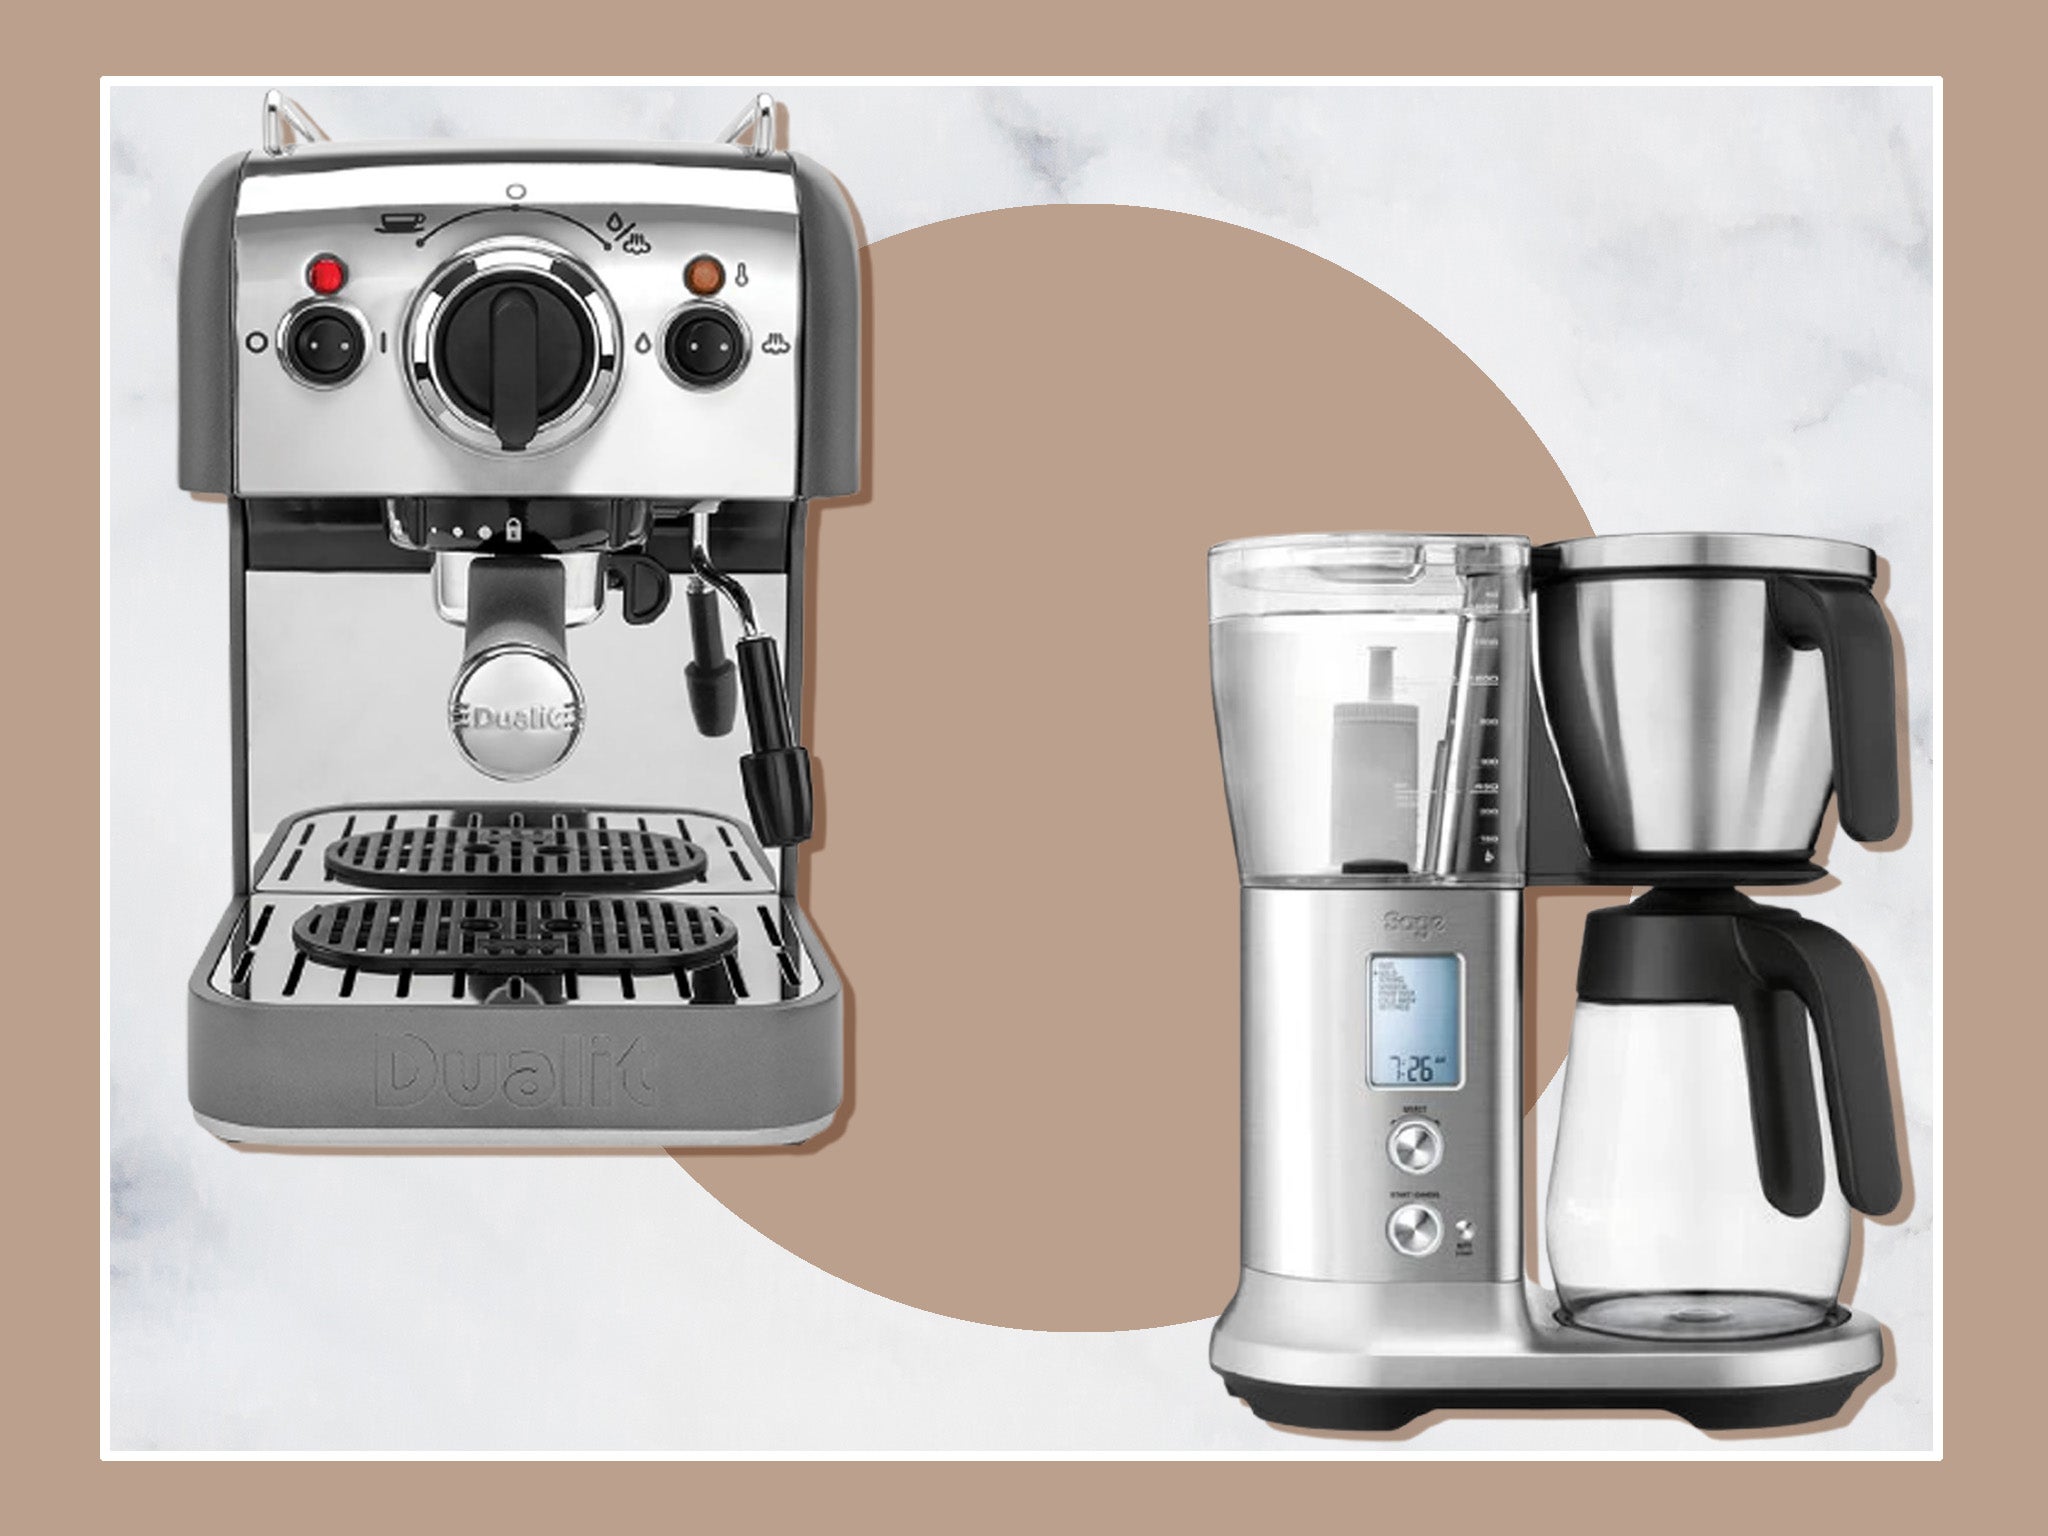 Which Sage coffee machine should you buy?